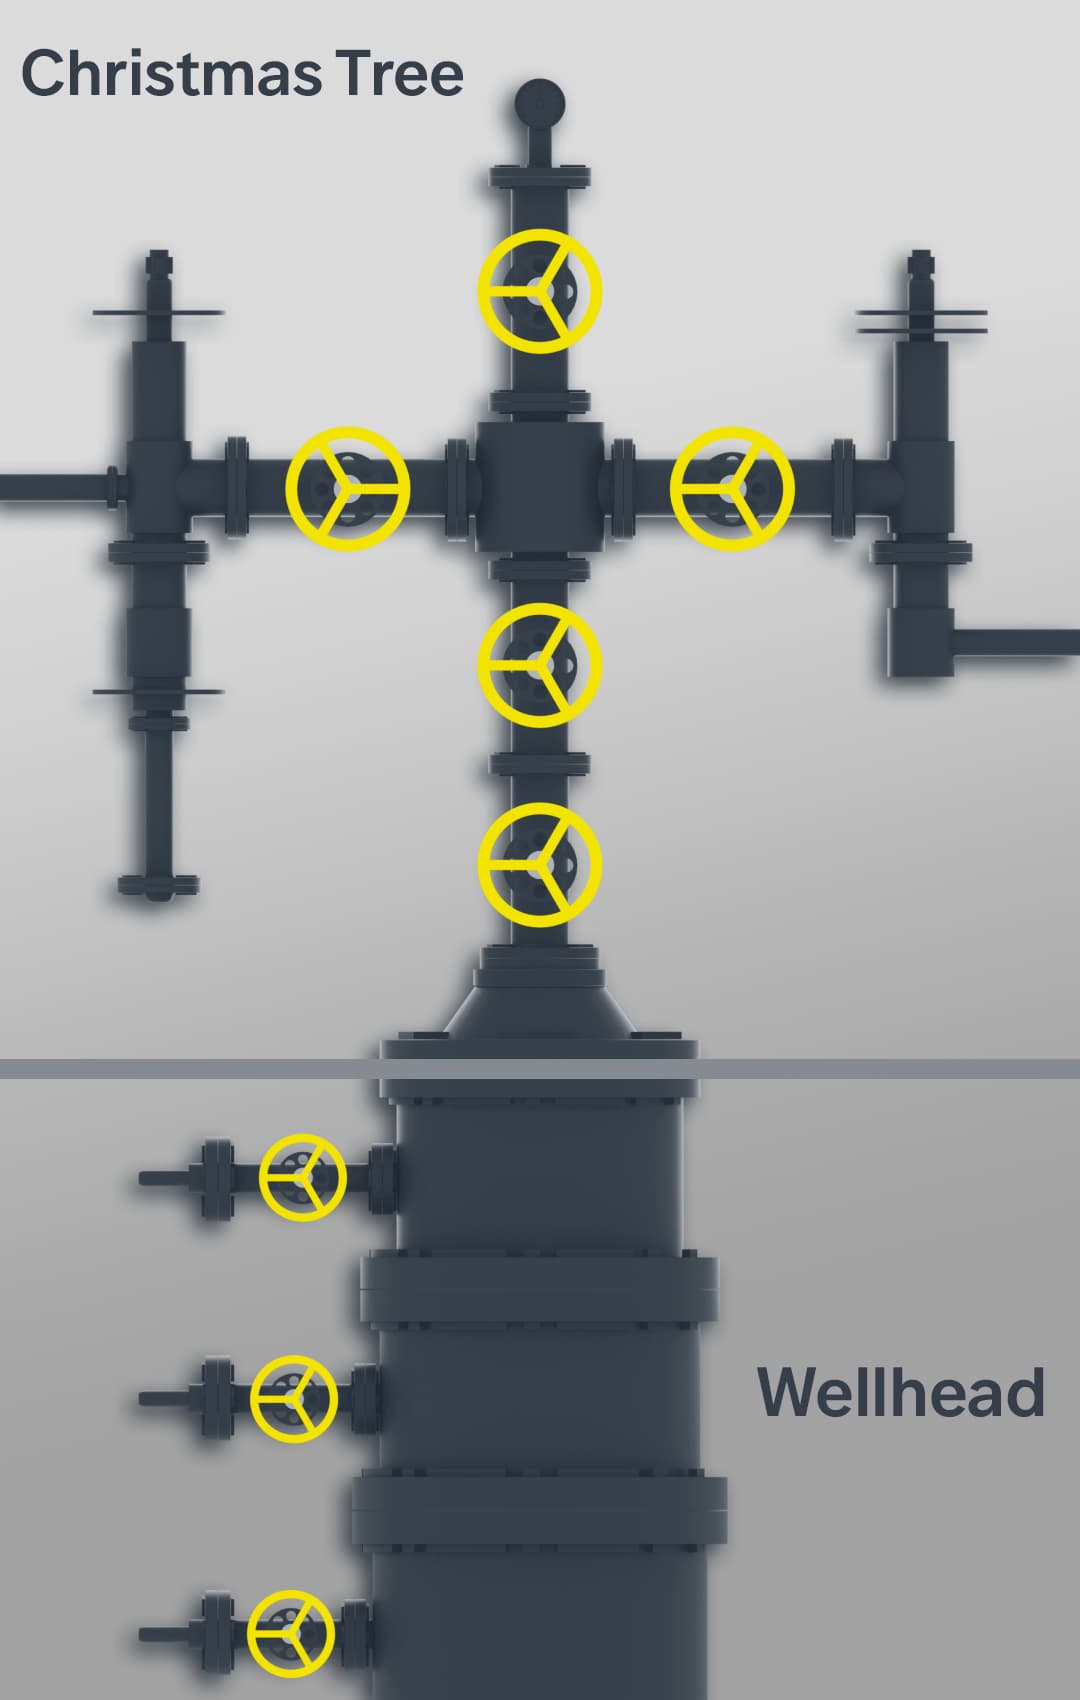 Top of an oil or gas well